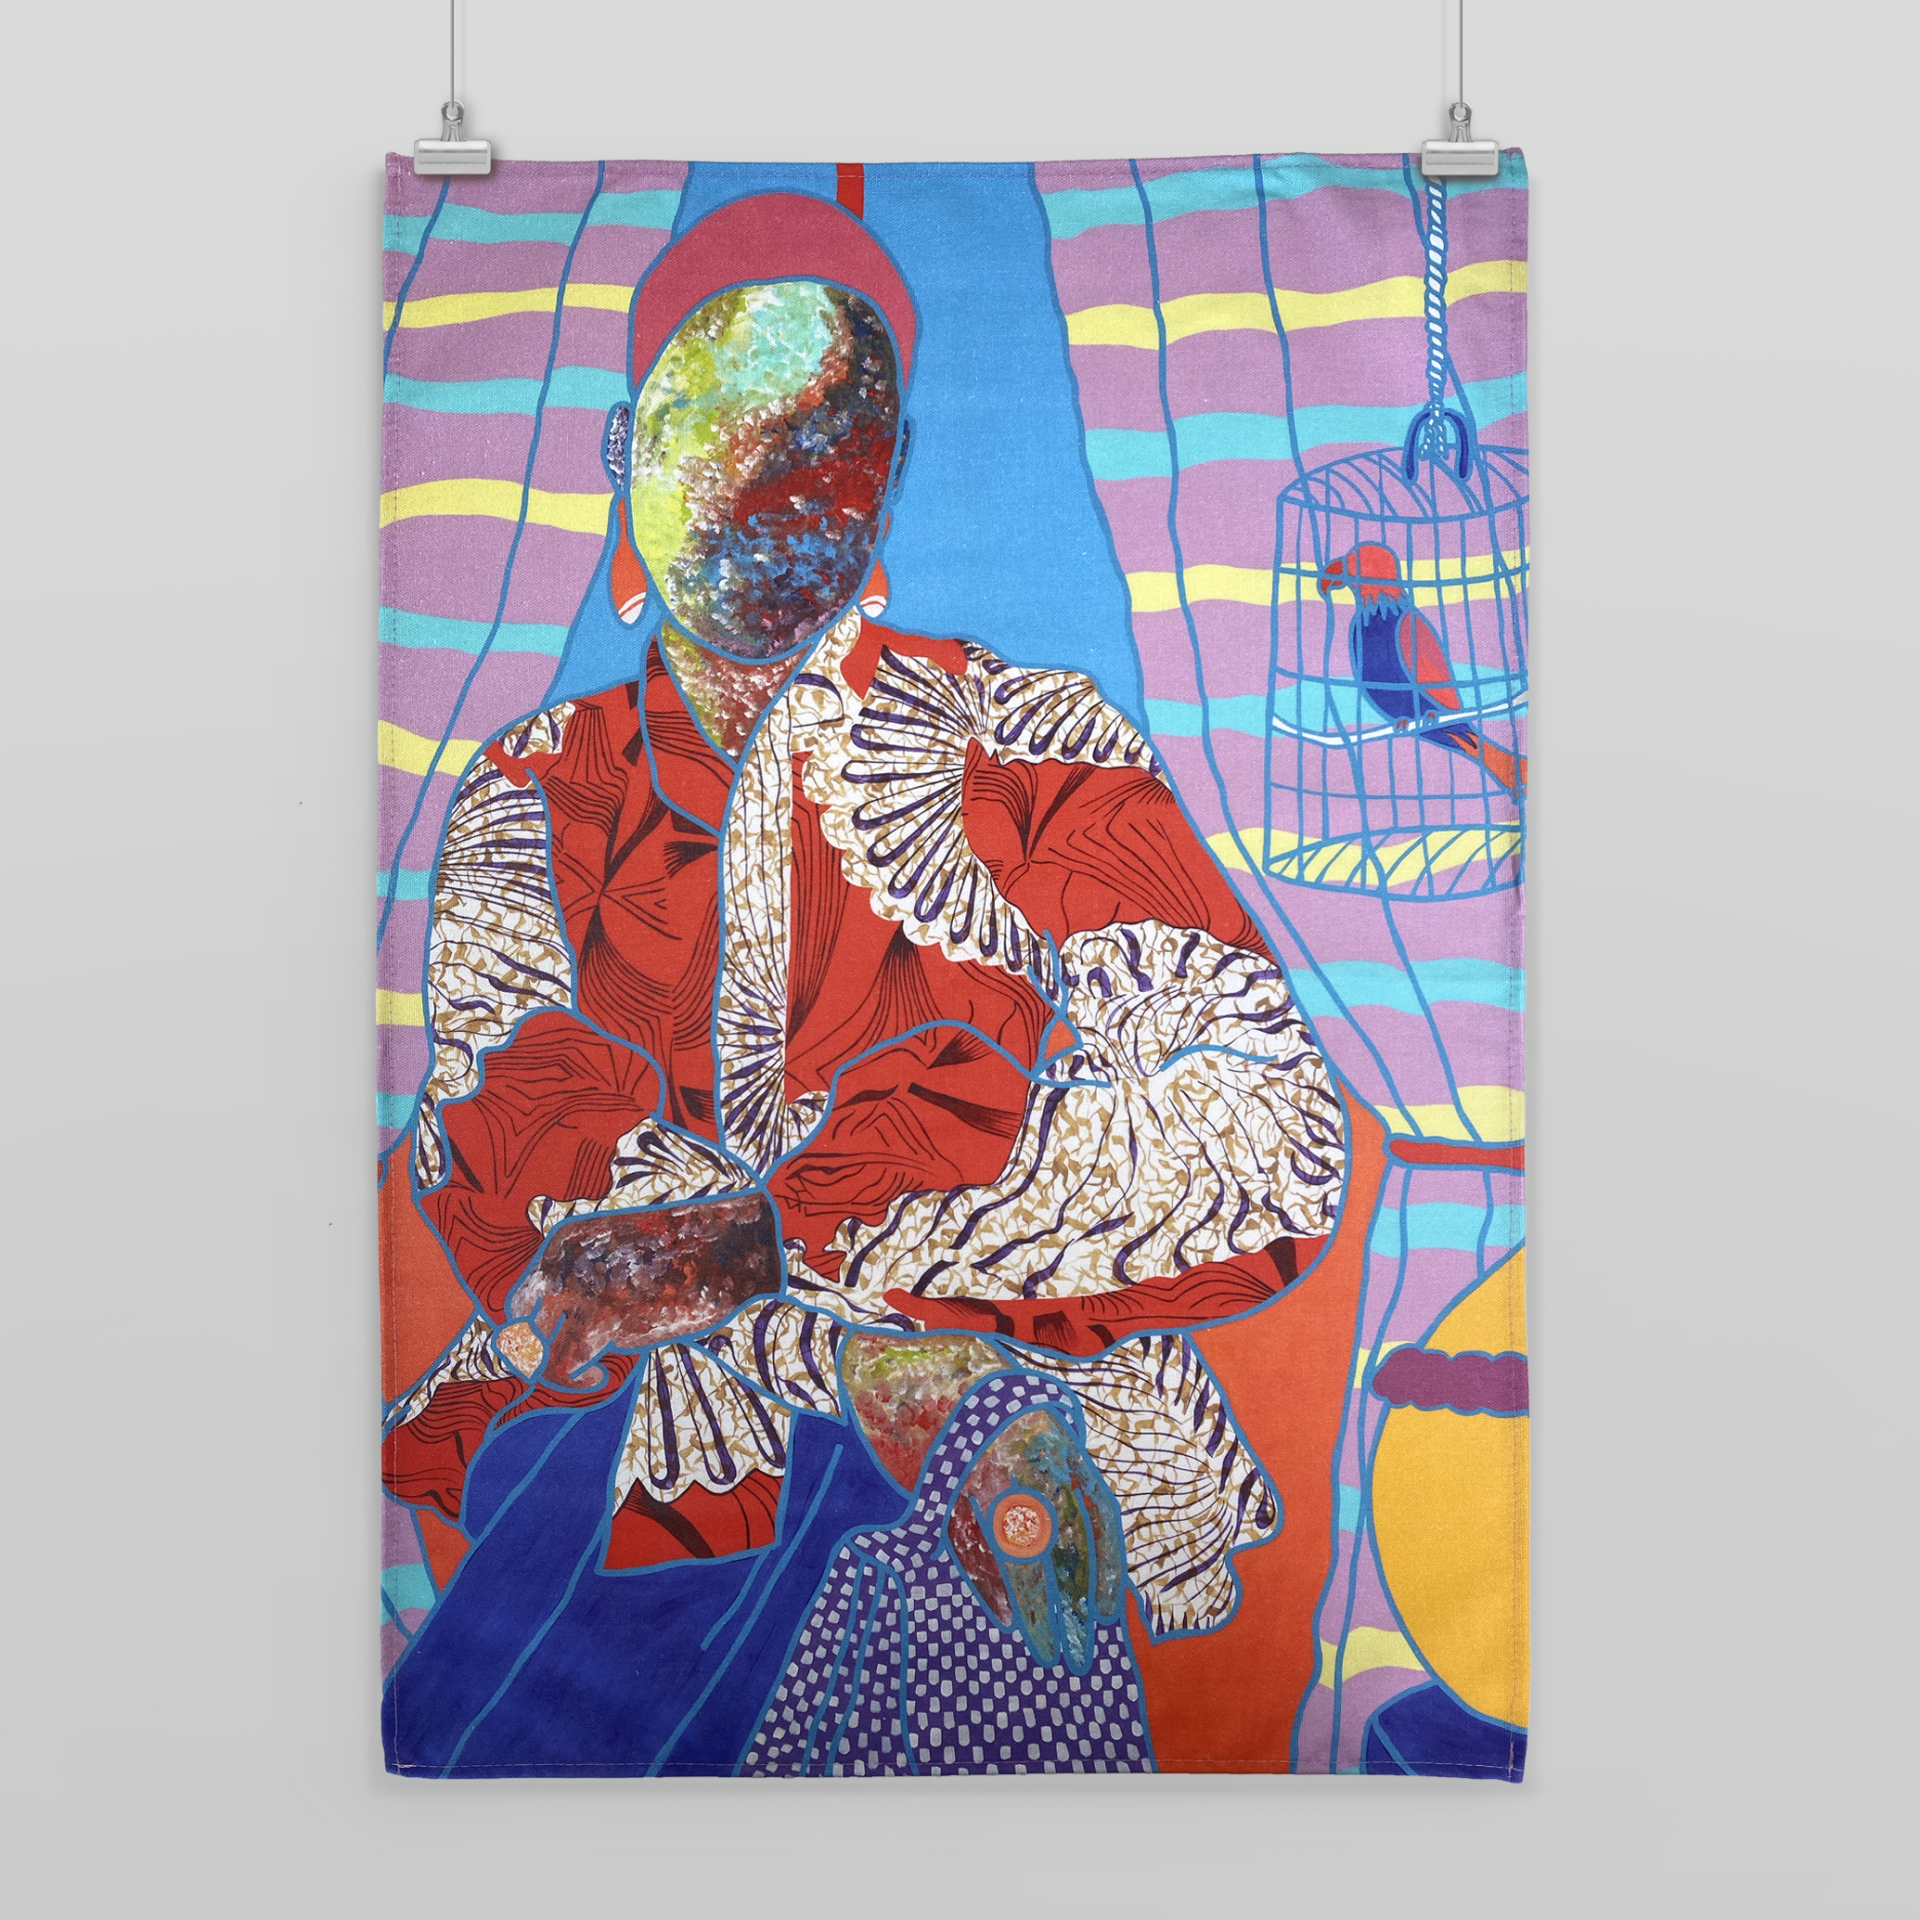 Digital printed Tea Towel in the UK for the Dulwich Picture Gallery 1